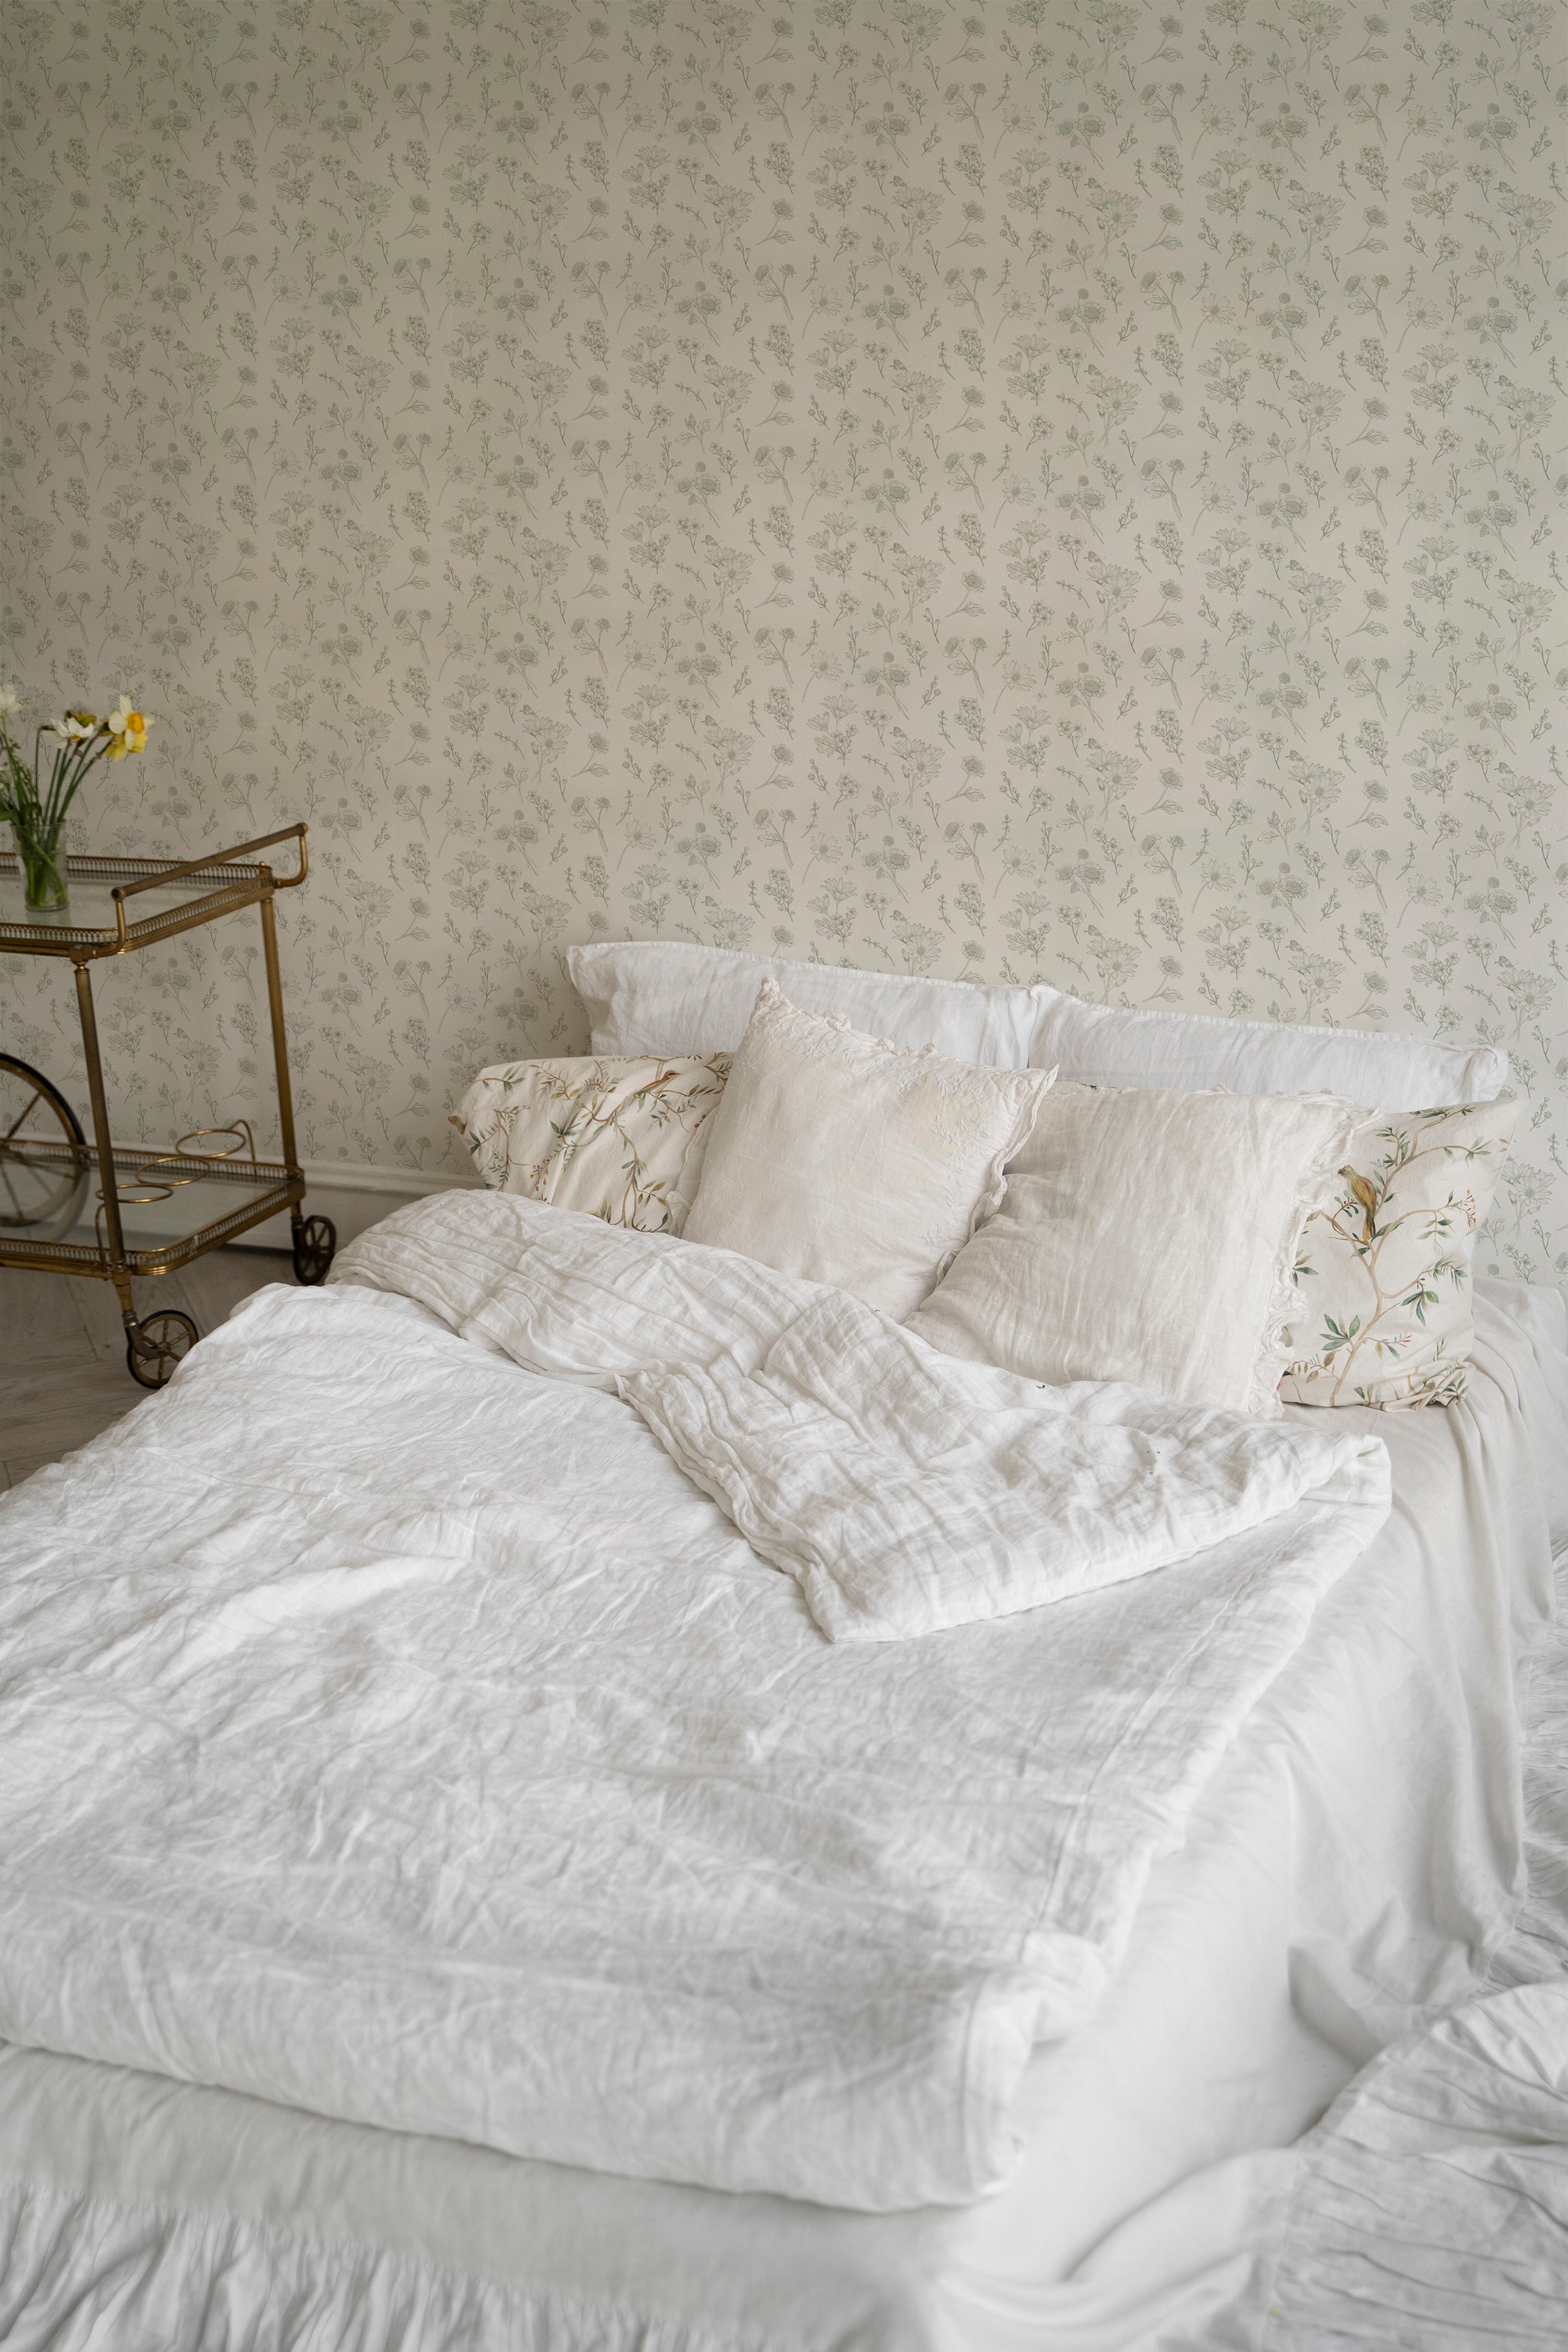 An elegant bedroom setting showcasing the Timeless Toile Wallpaper with a detailed pattern of sketched floral and botanical motifs in olive tones, adding a touch of classic sophistication to the room.